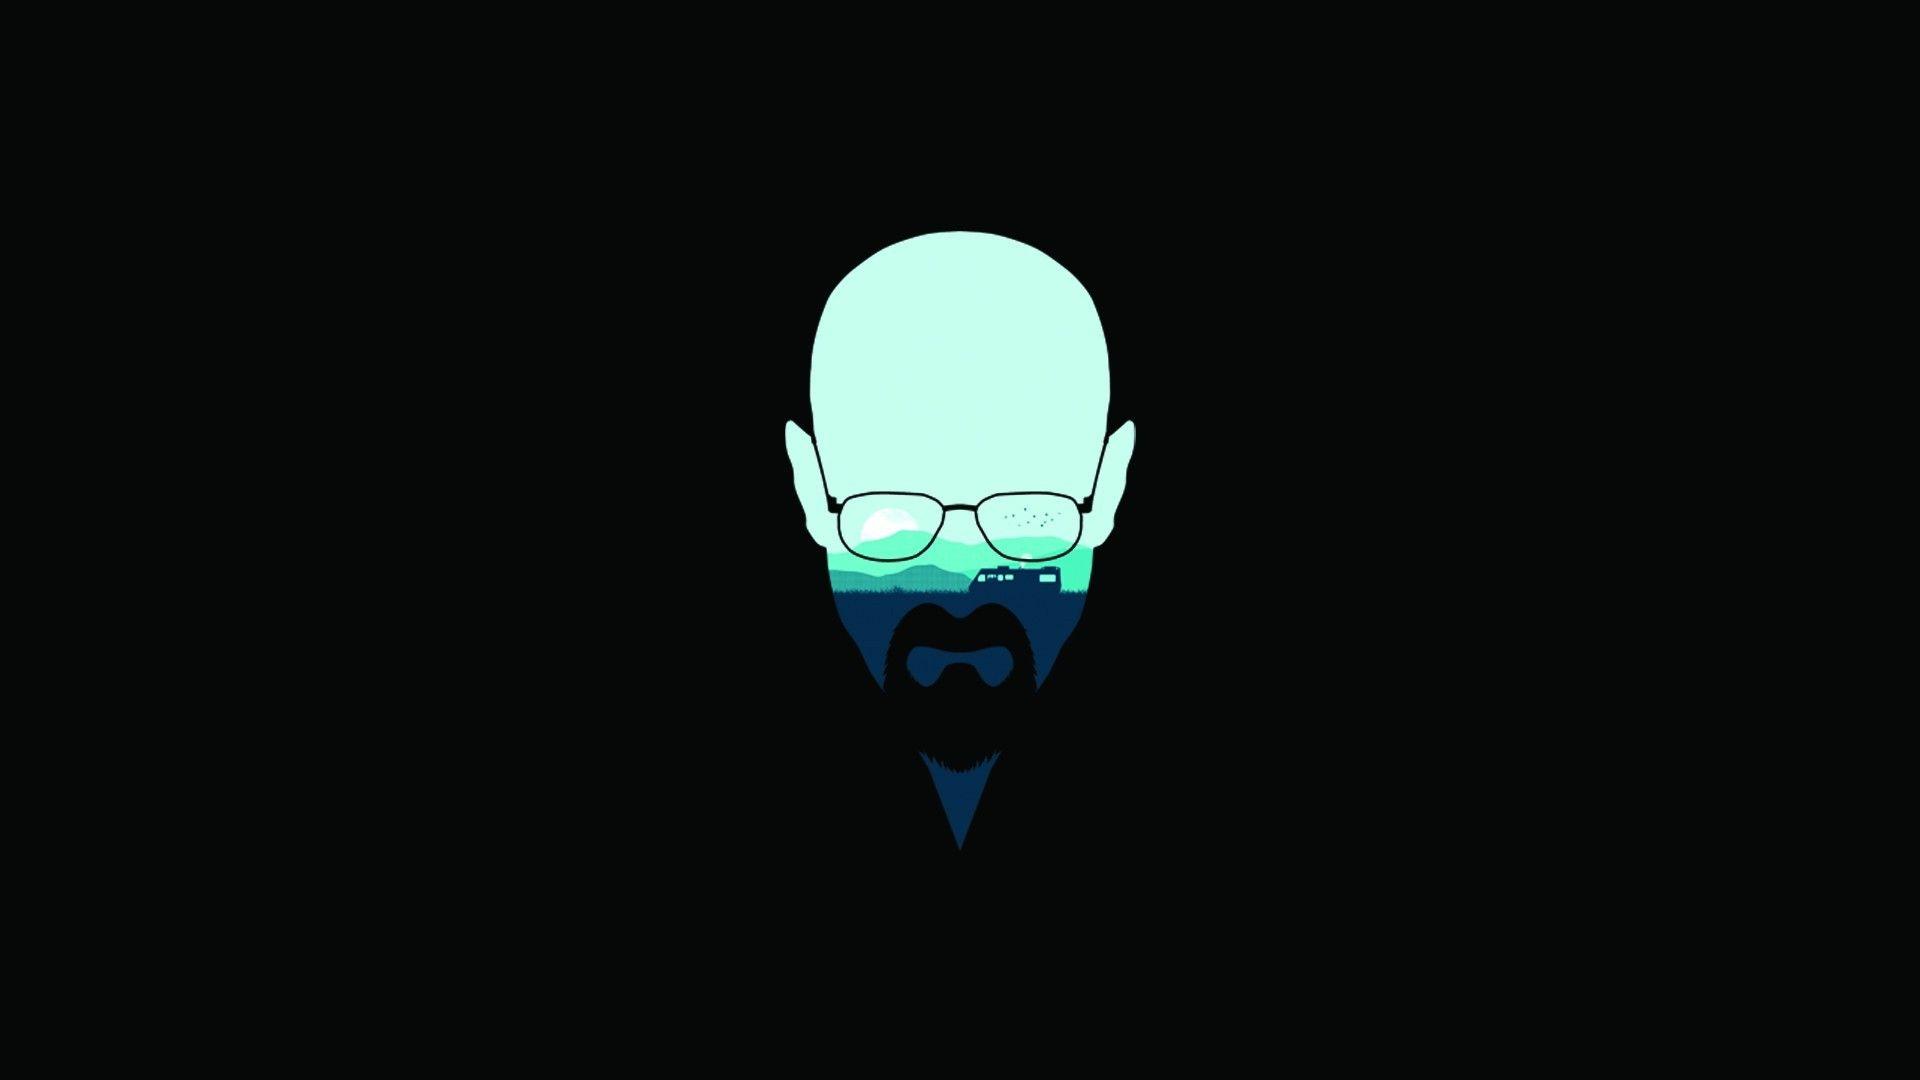 Simply: Breaking Bad Walter White abstract